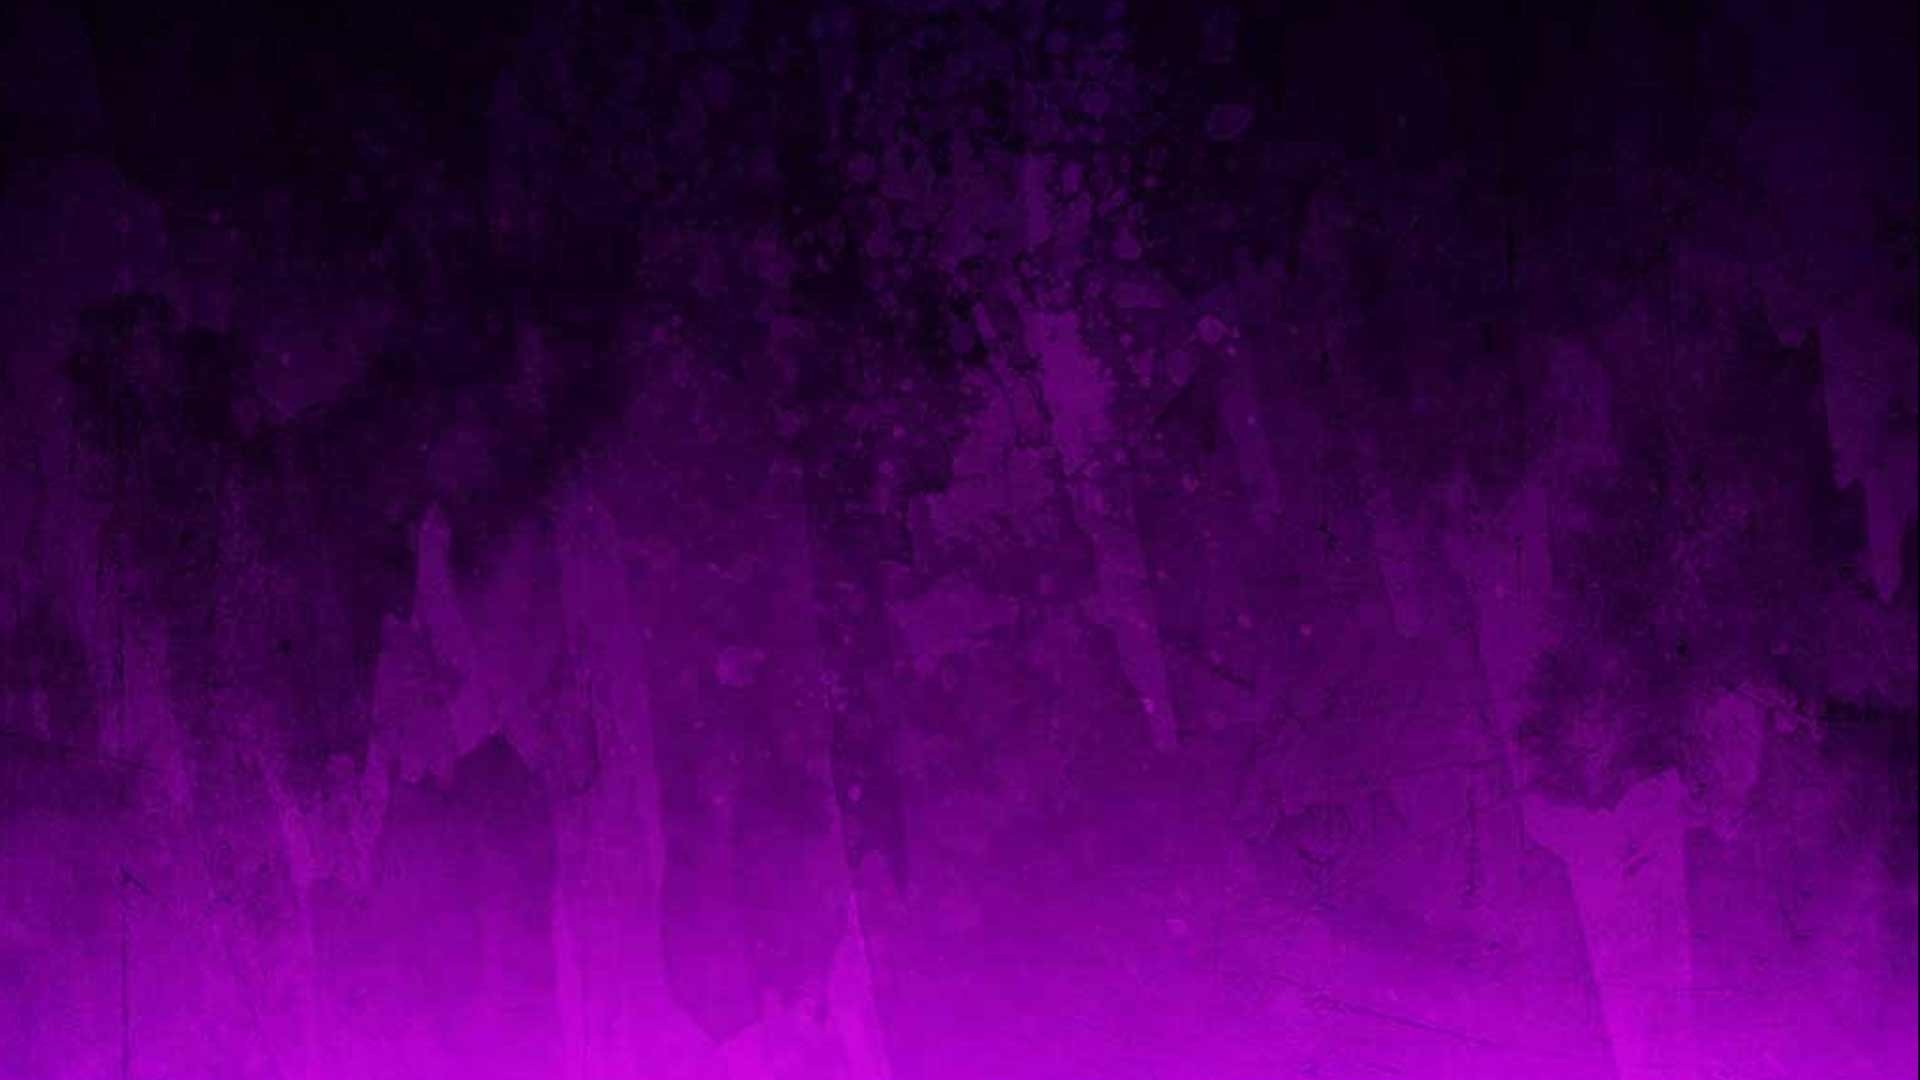 Tumblr Purple Backgrounds 67 Images